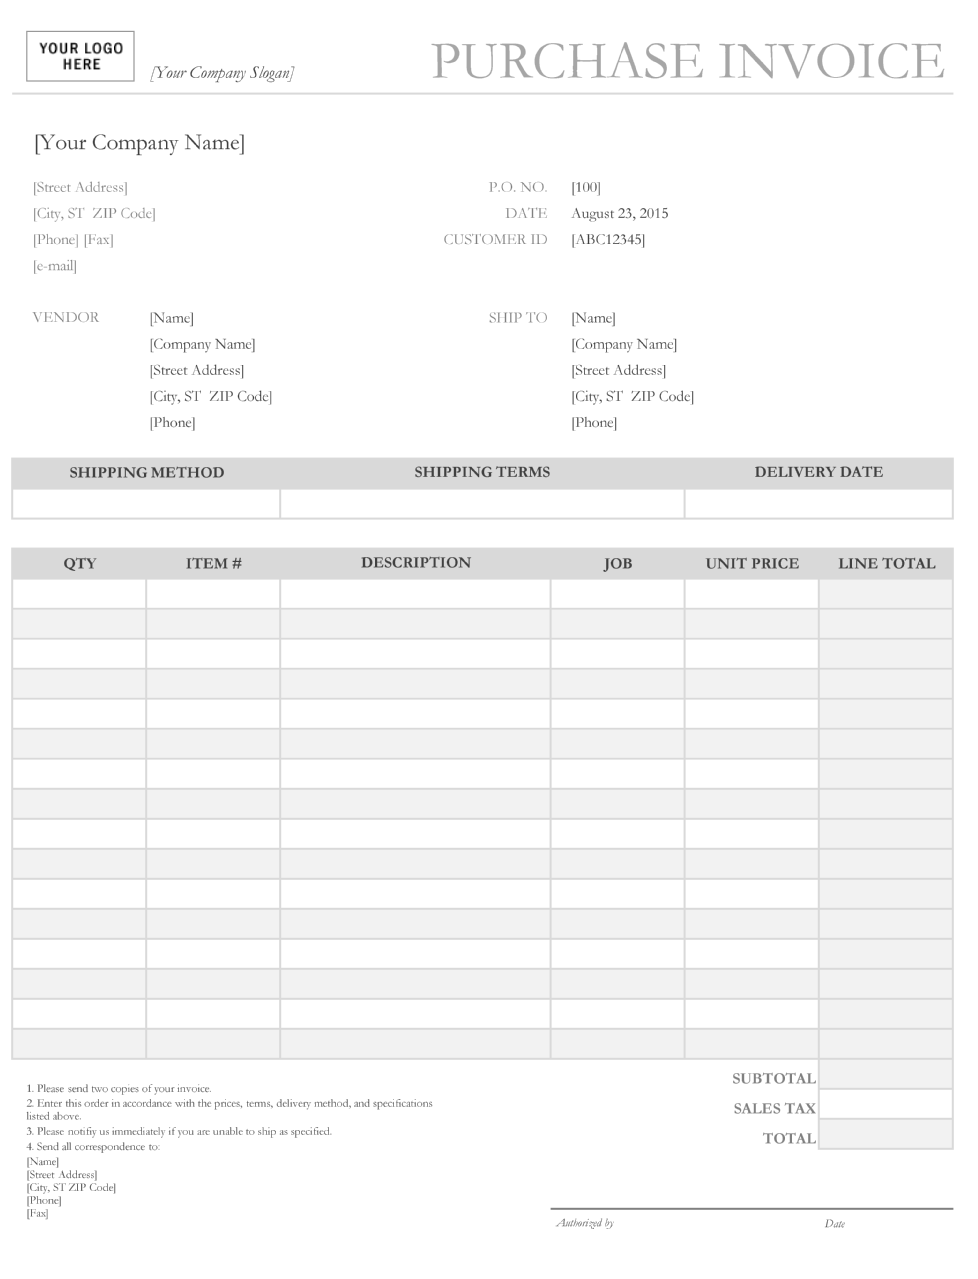 Purchase Invoice Sample